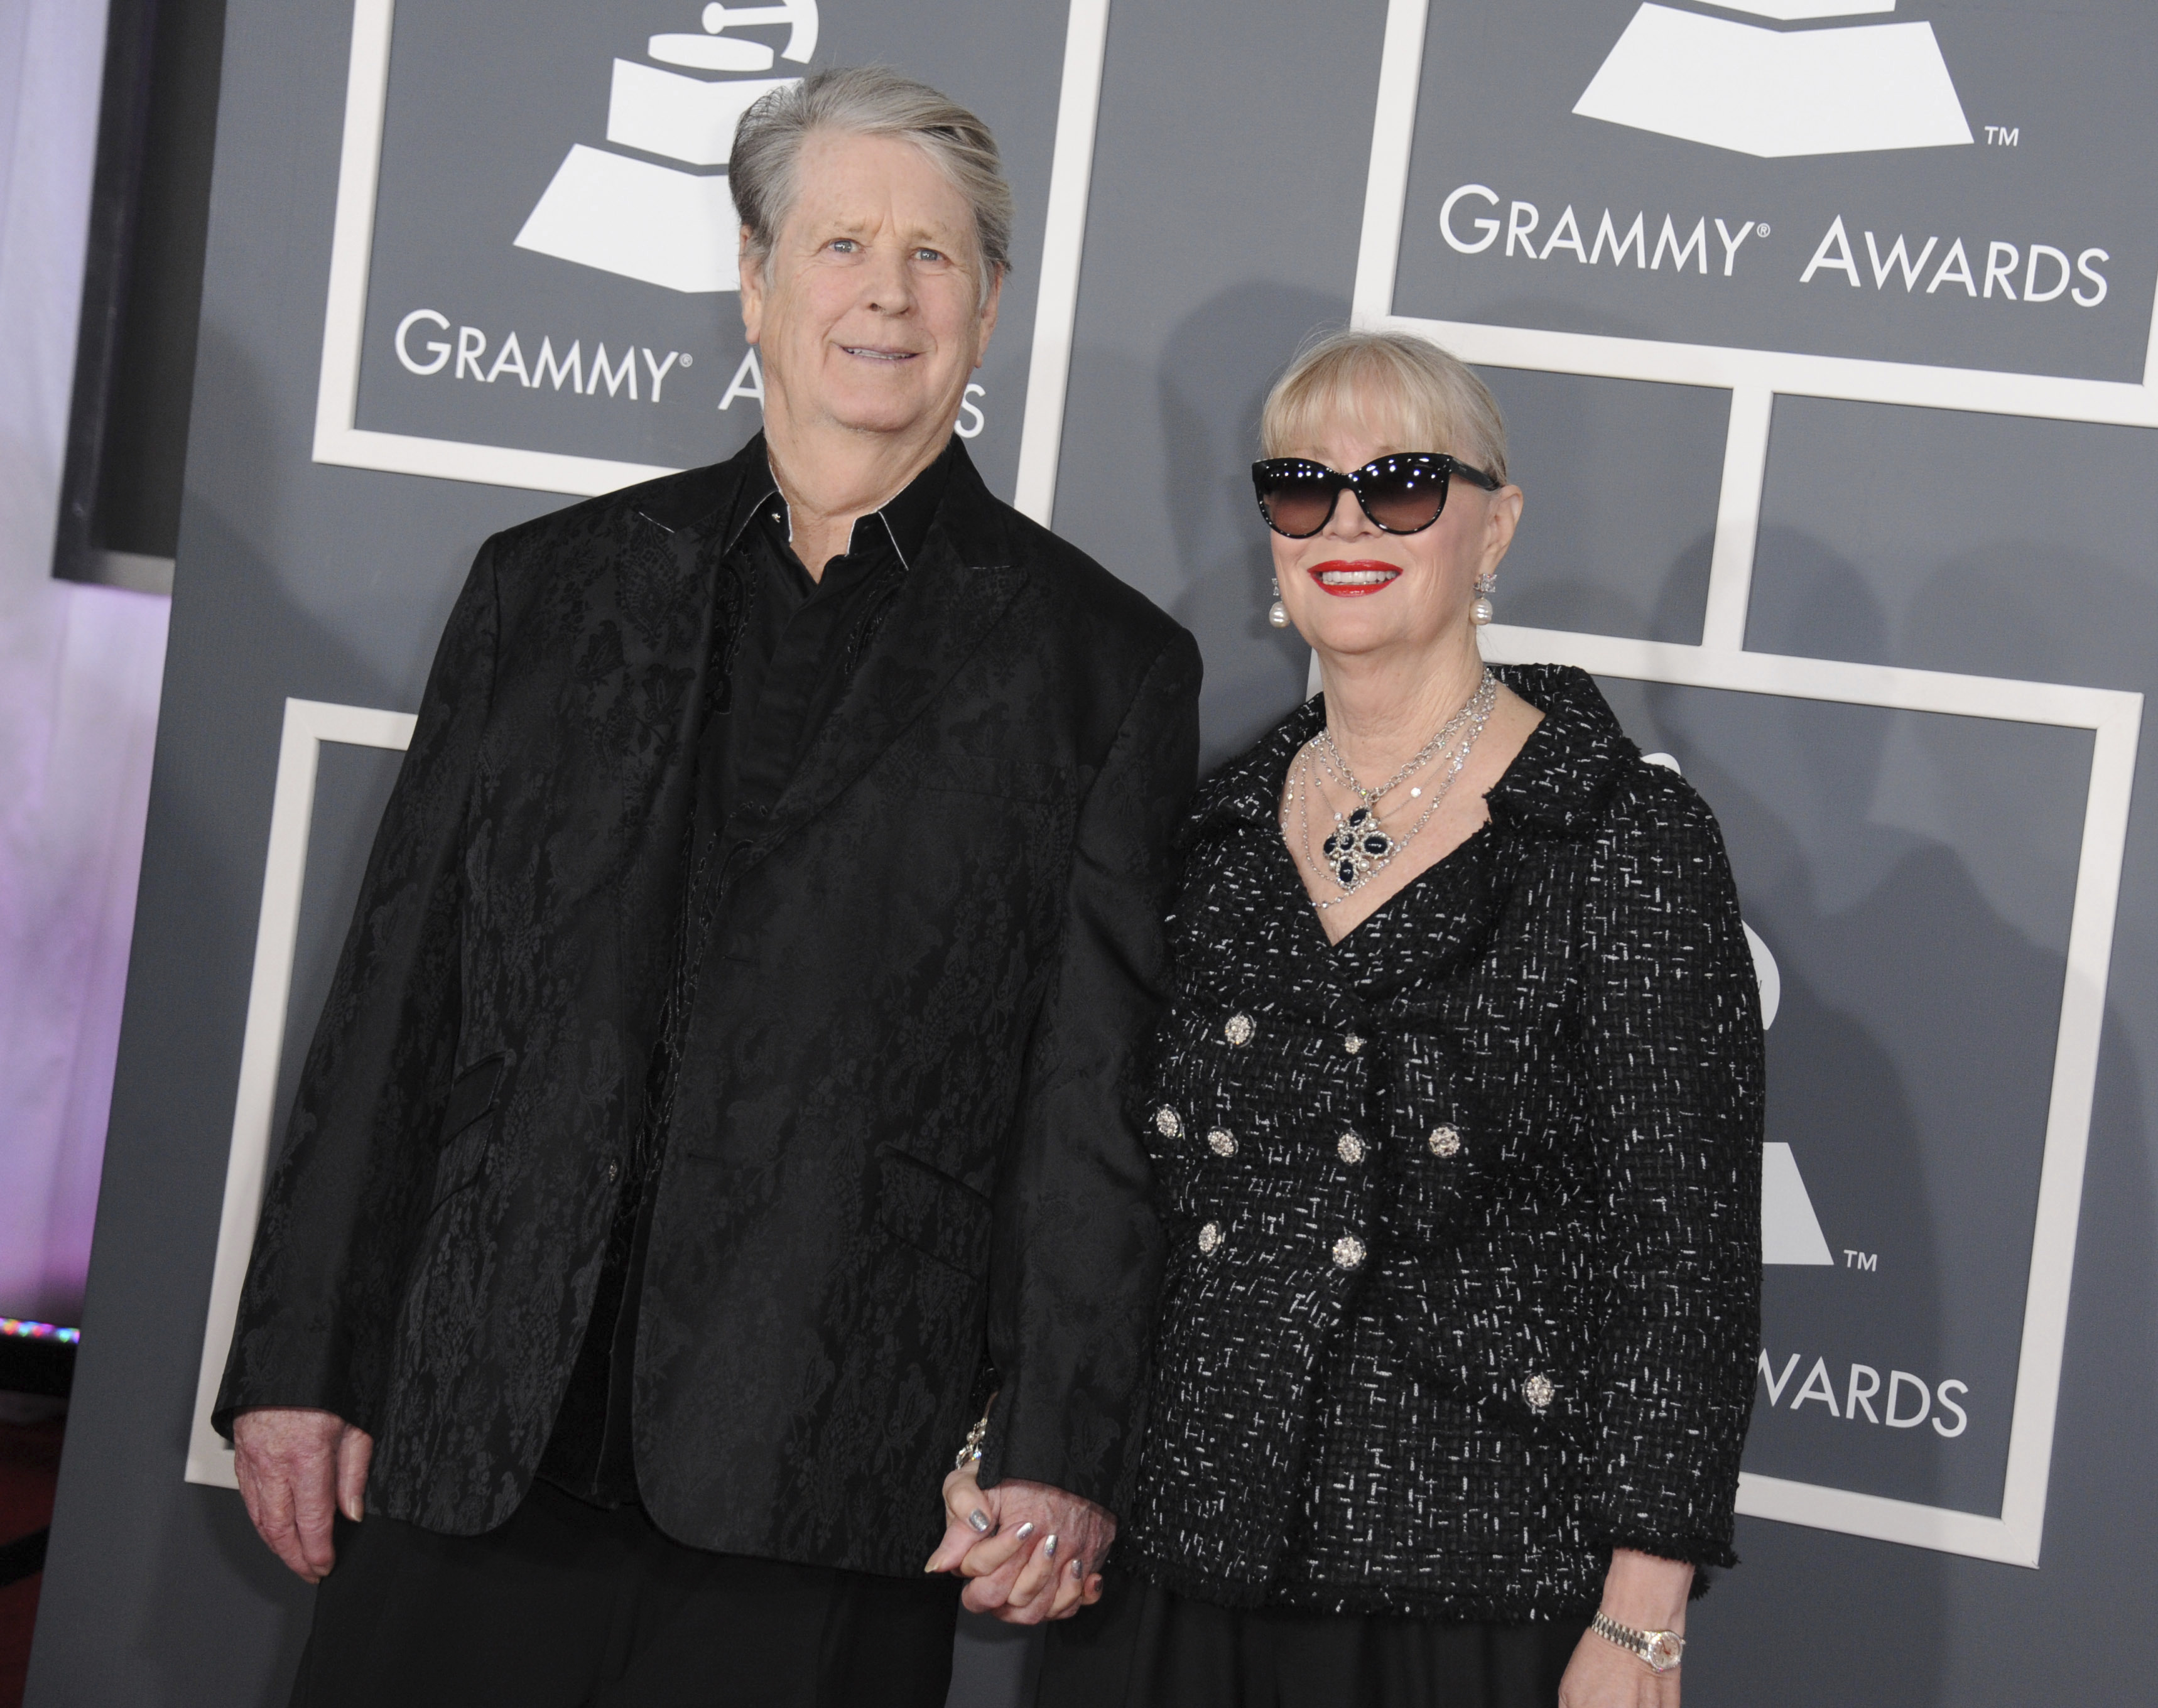 This news comes just weeks after the music legend's wife, Melinda Ledbetter, died at the age of 77